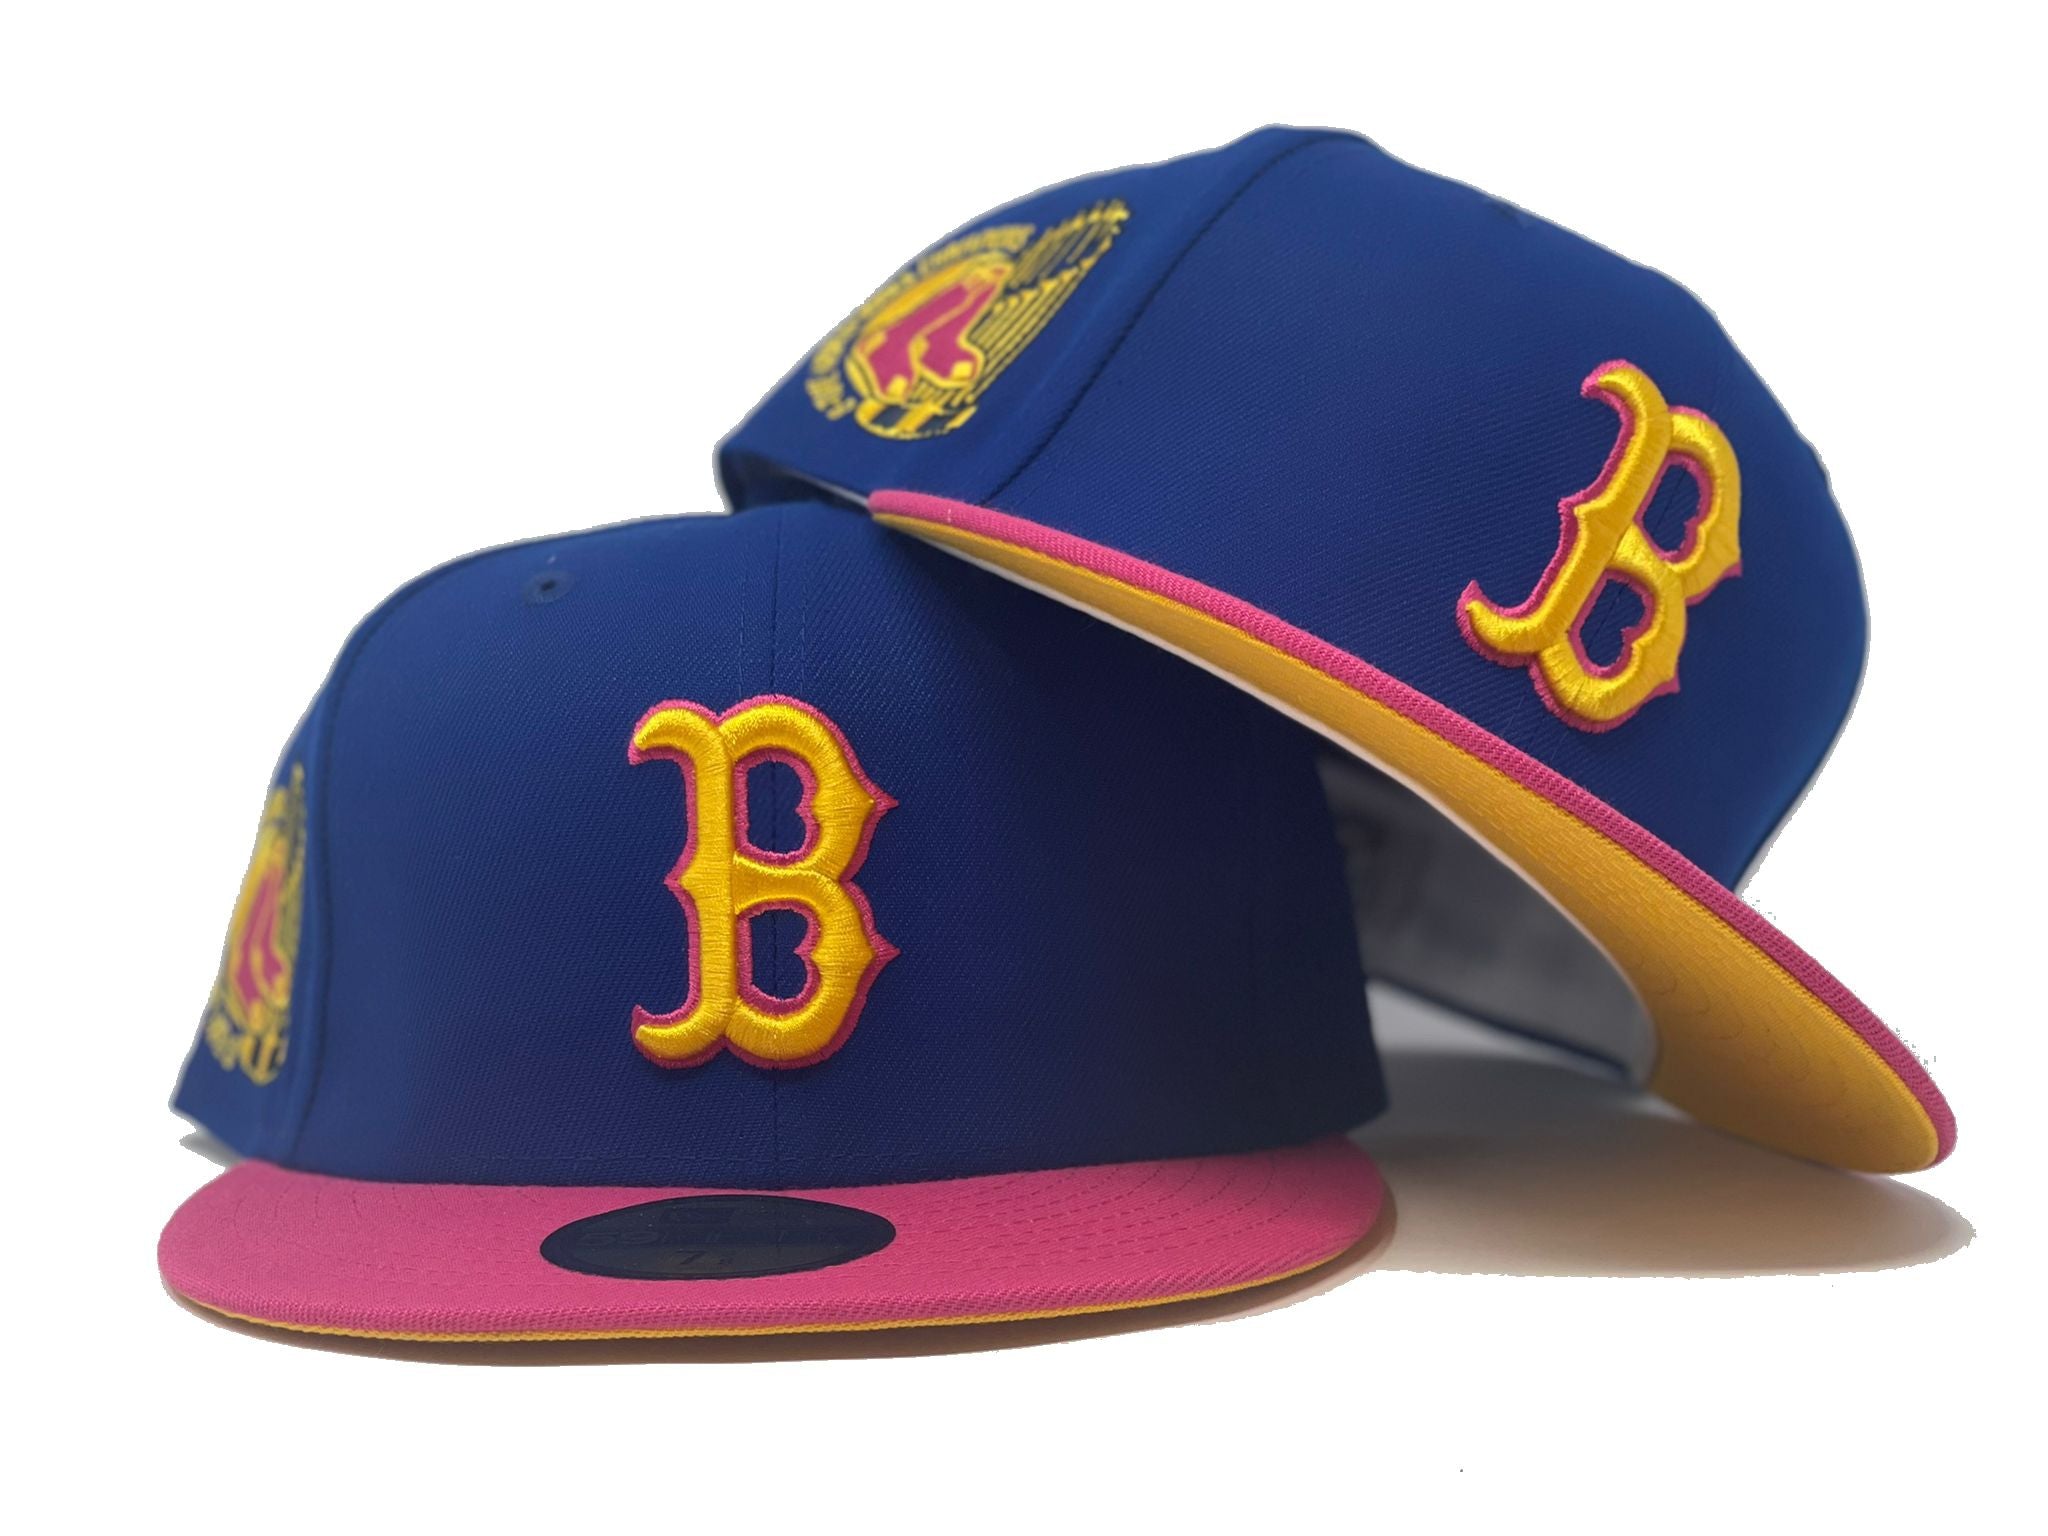 red sox yellow hat